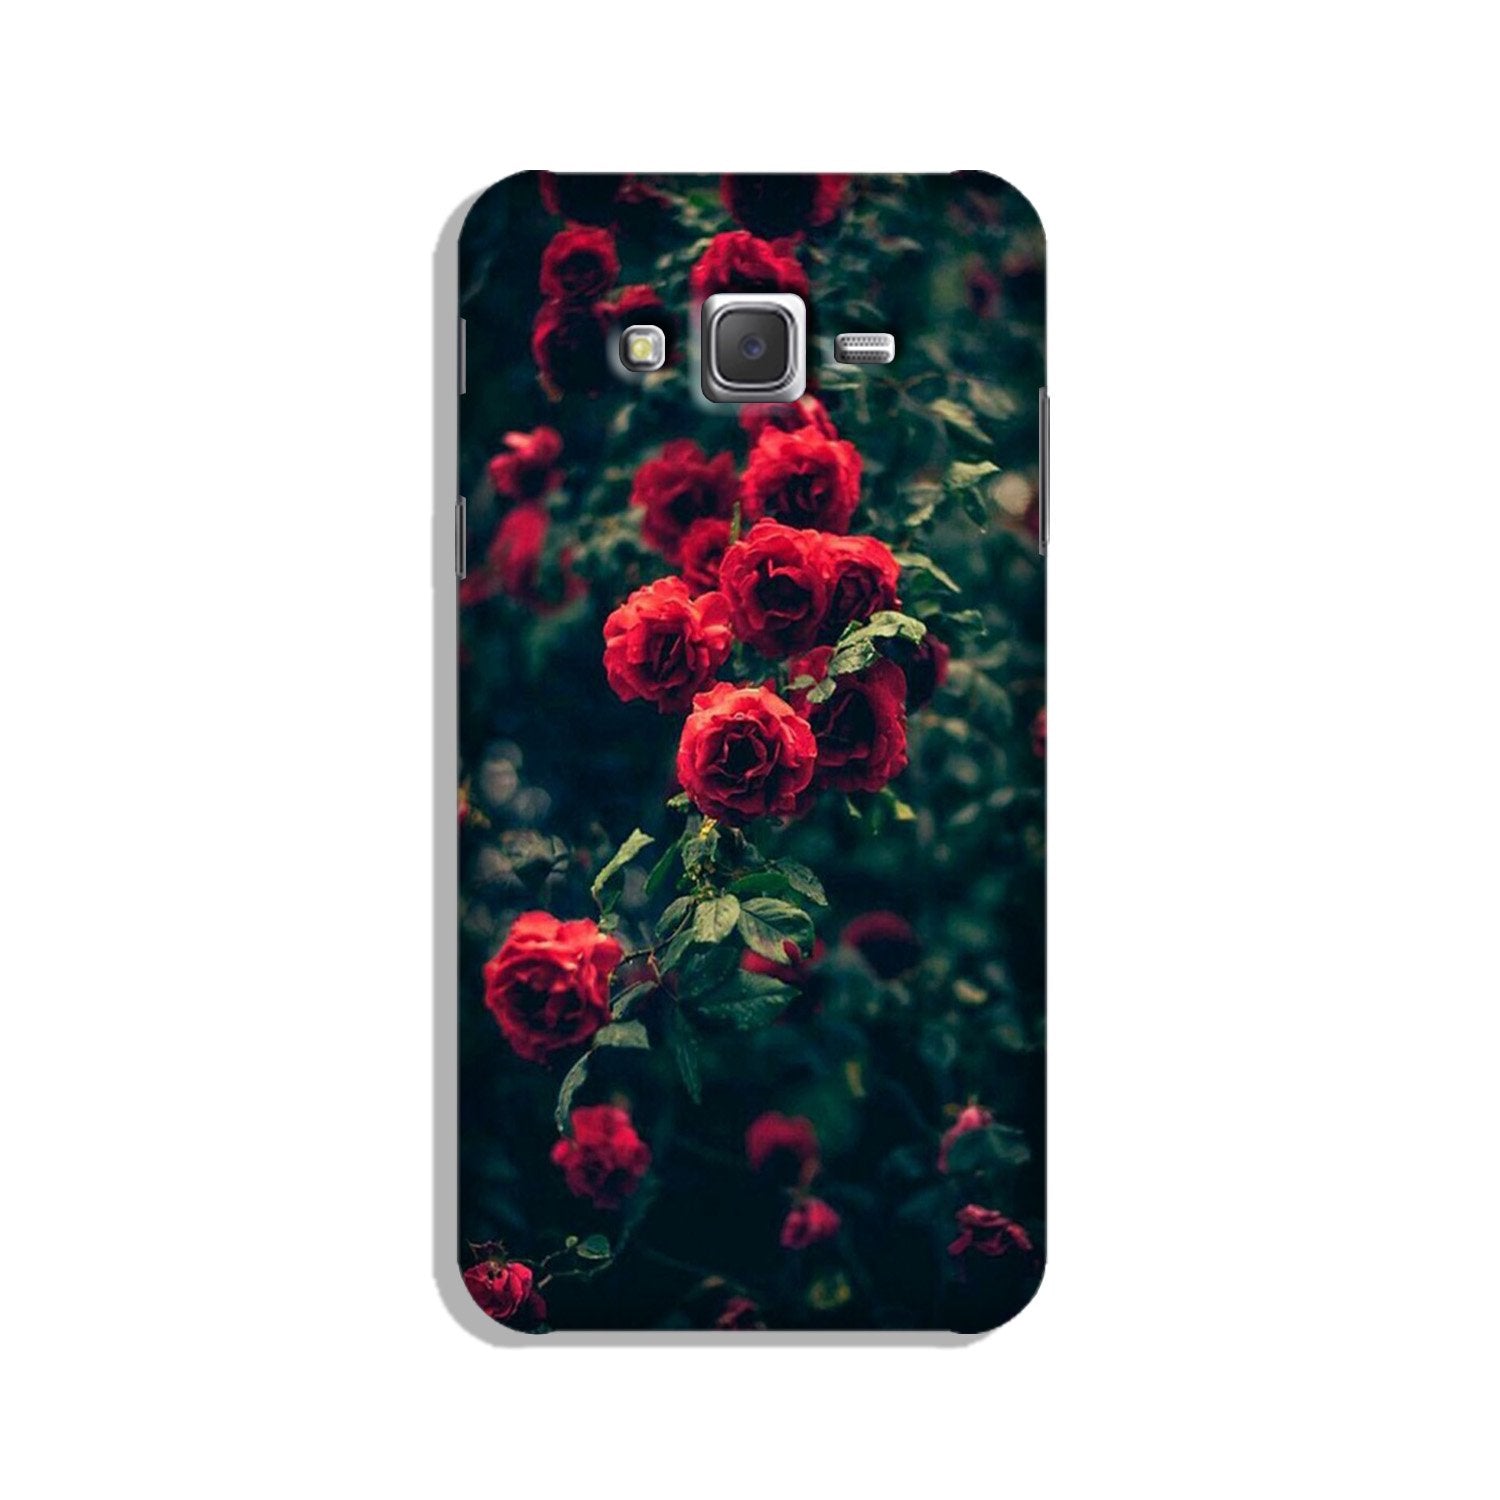 Red Rose Case for Galaxy J3 (2015)